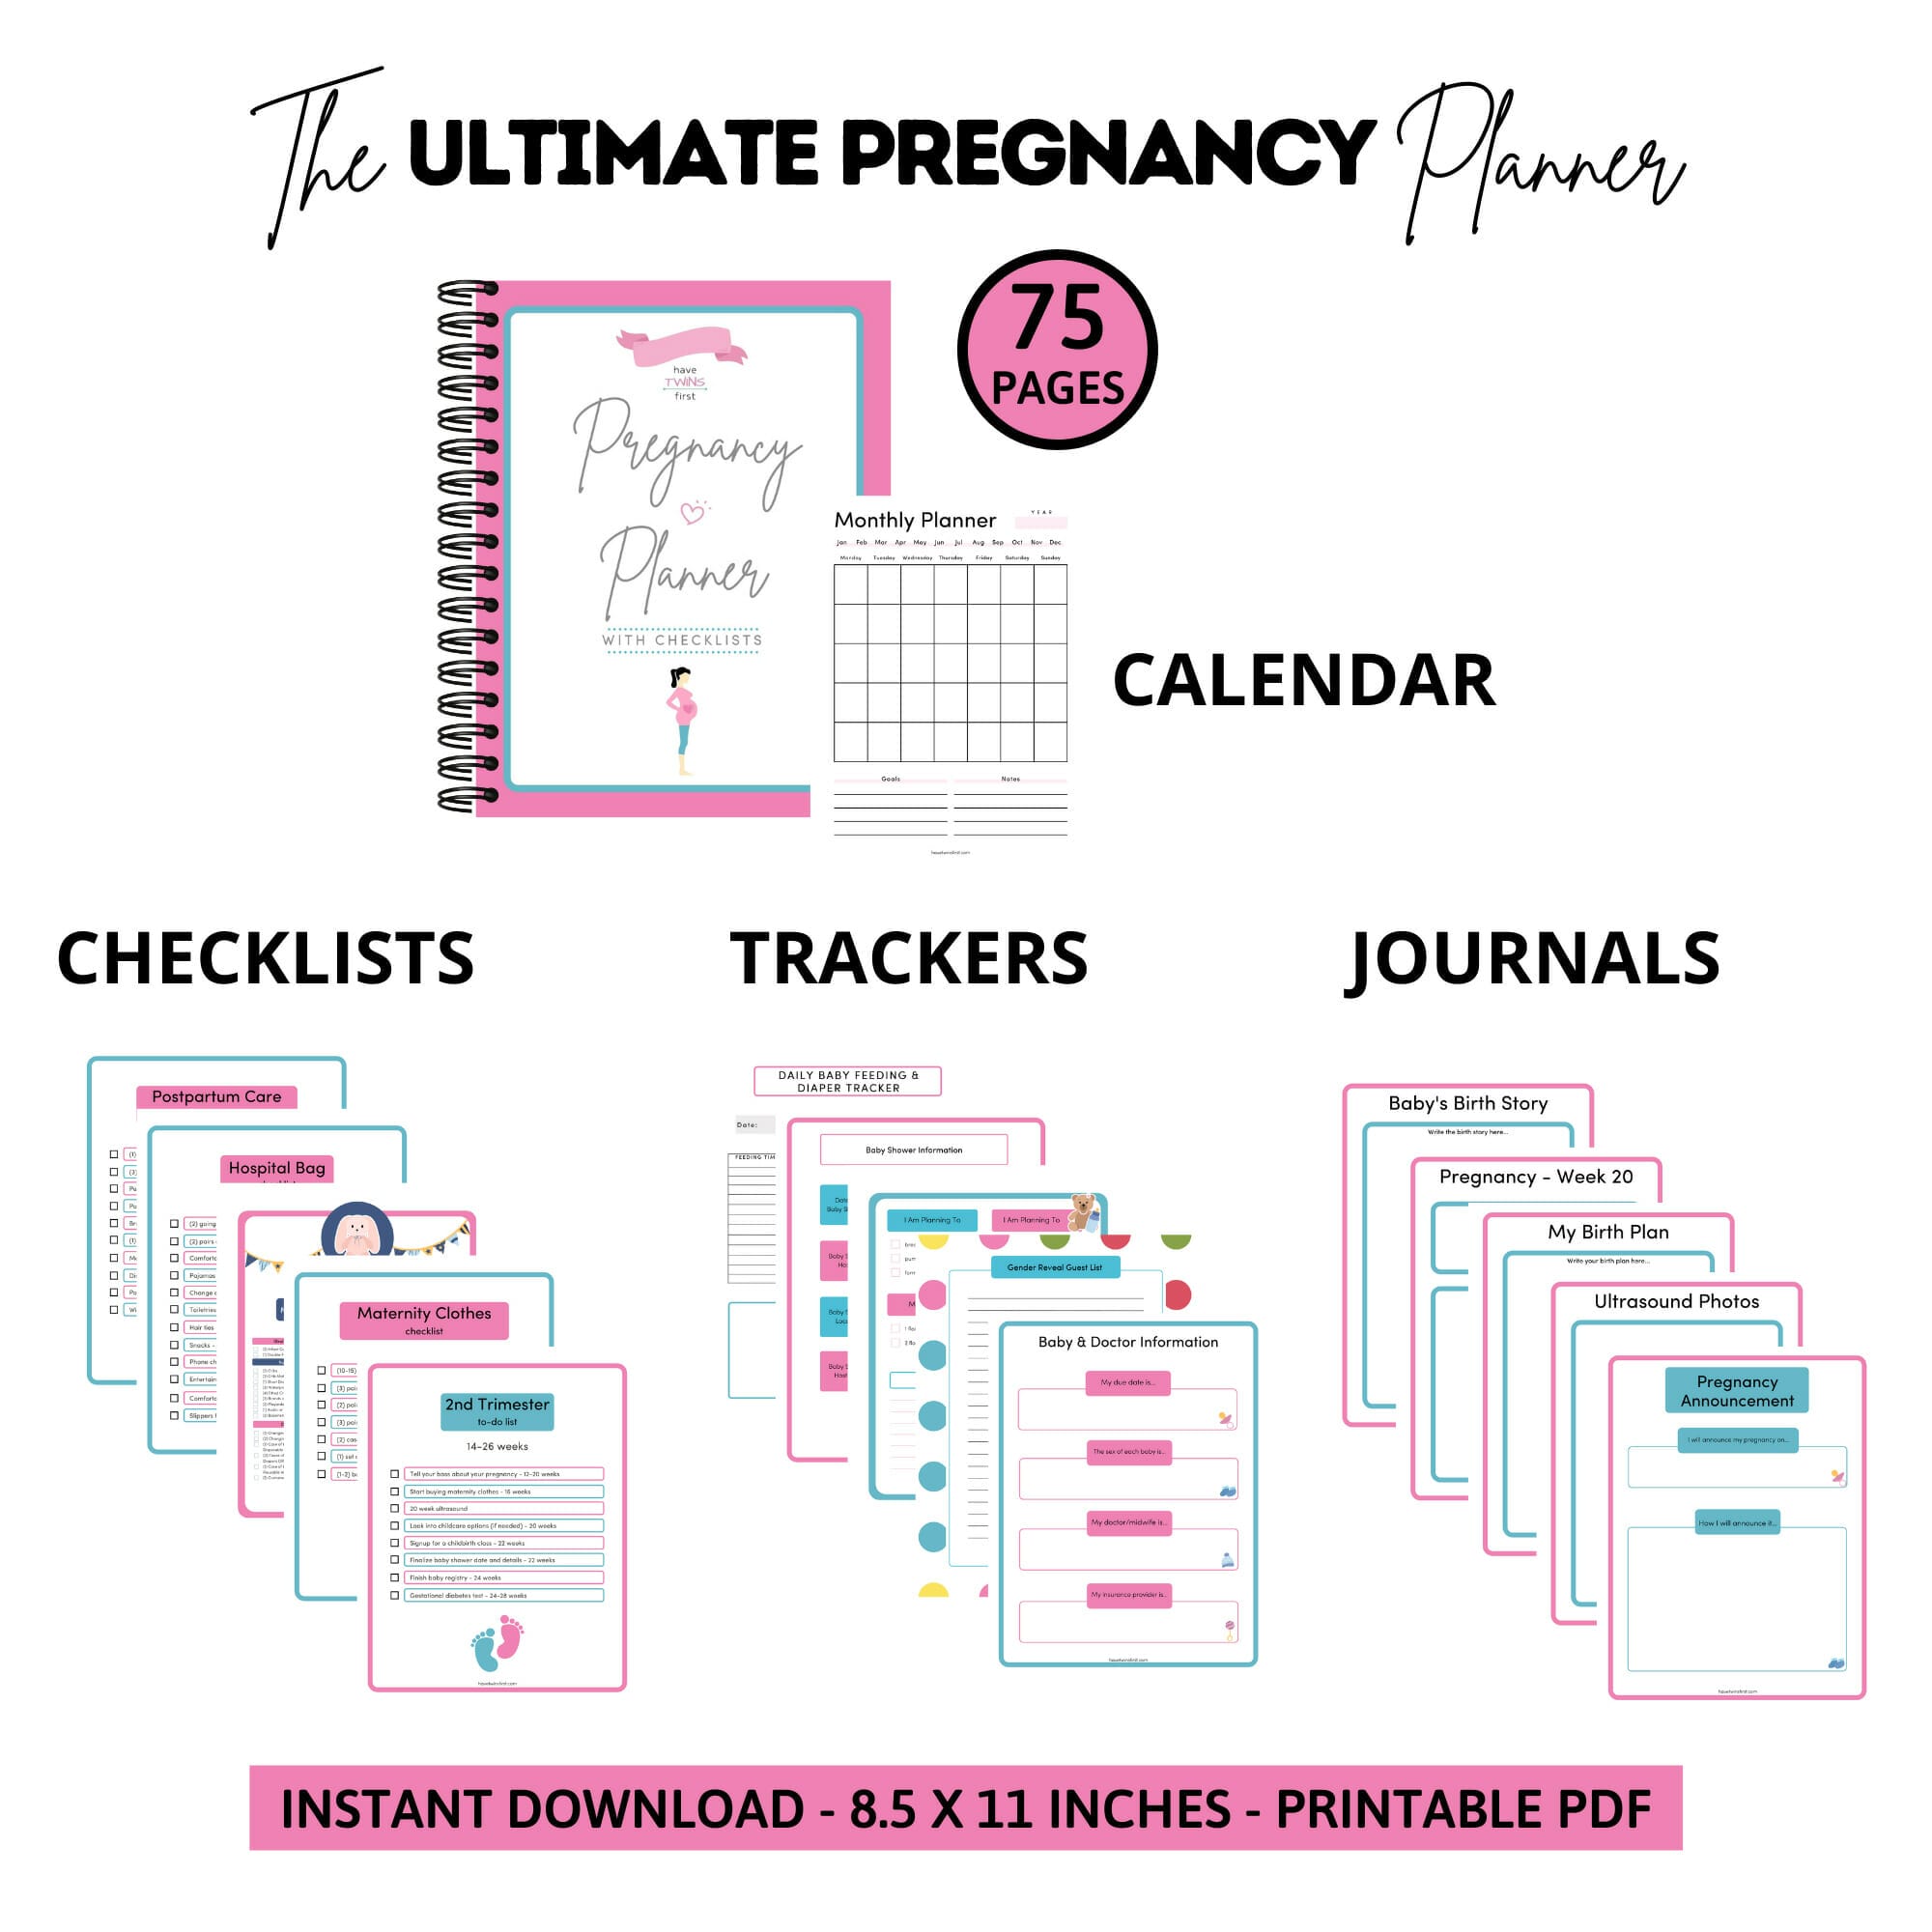 Pregnancy planner checklists, trackers, journal, and calendar examples.